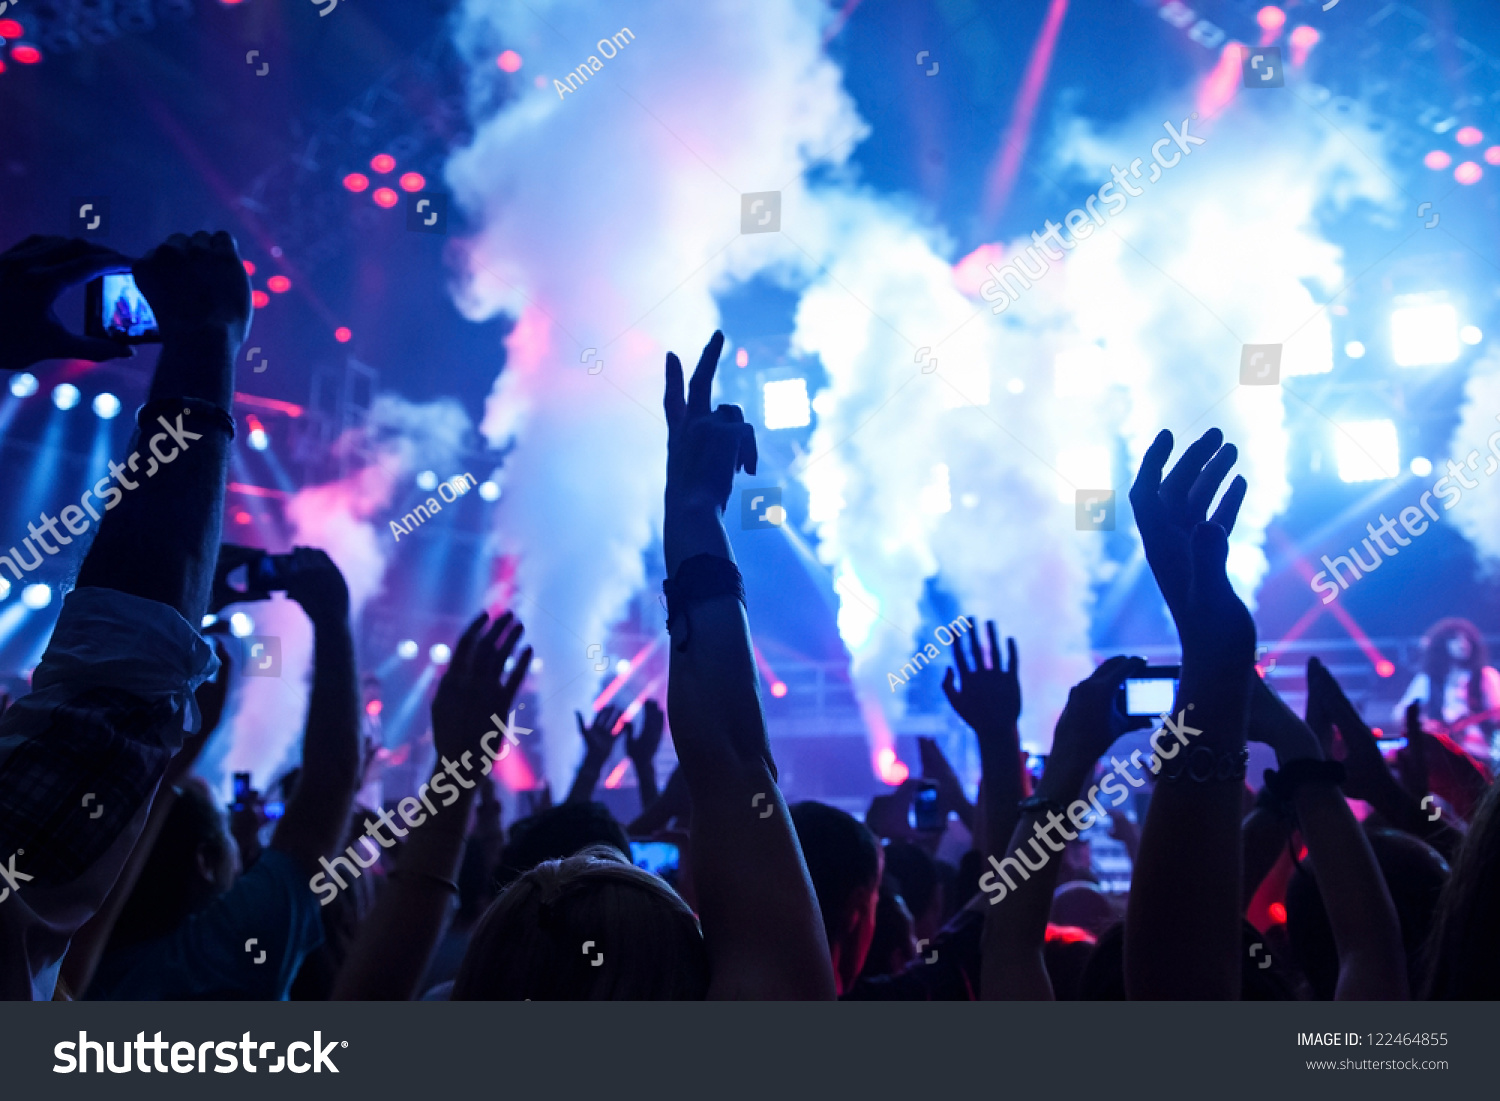 Picture Of Rock Concert, Music Festival, New Year Eve Celebration ...